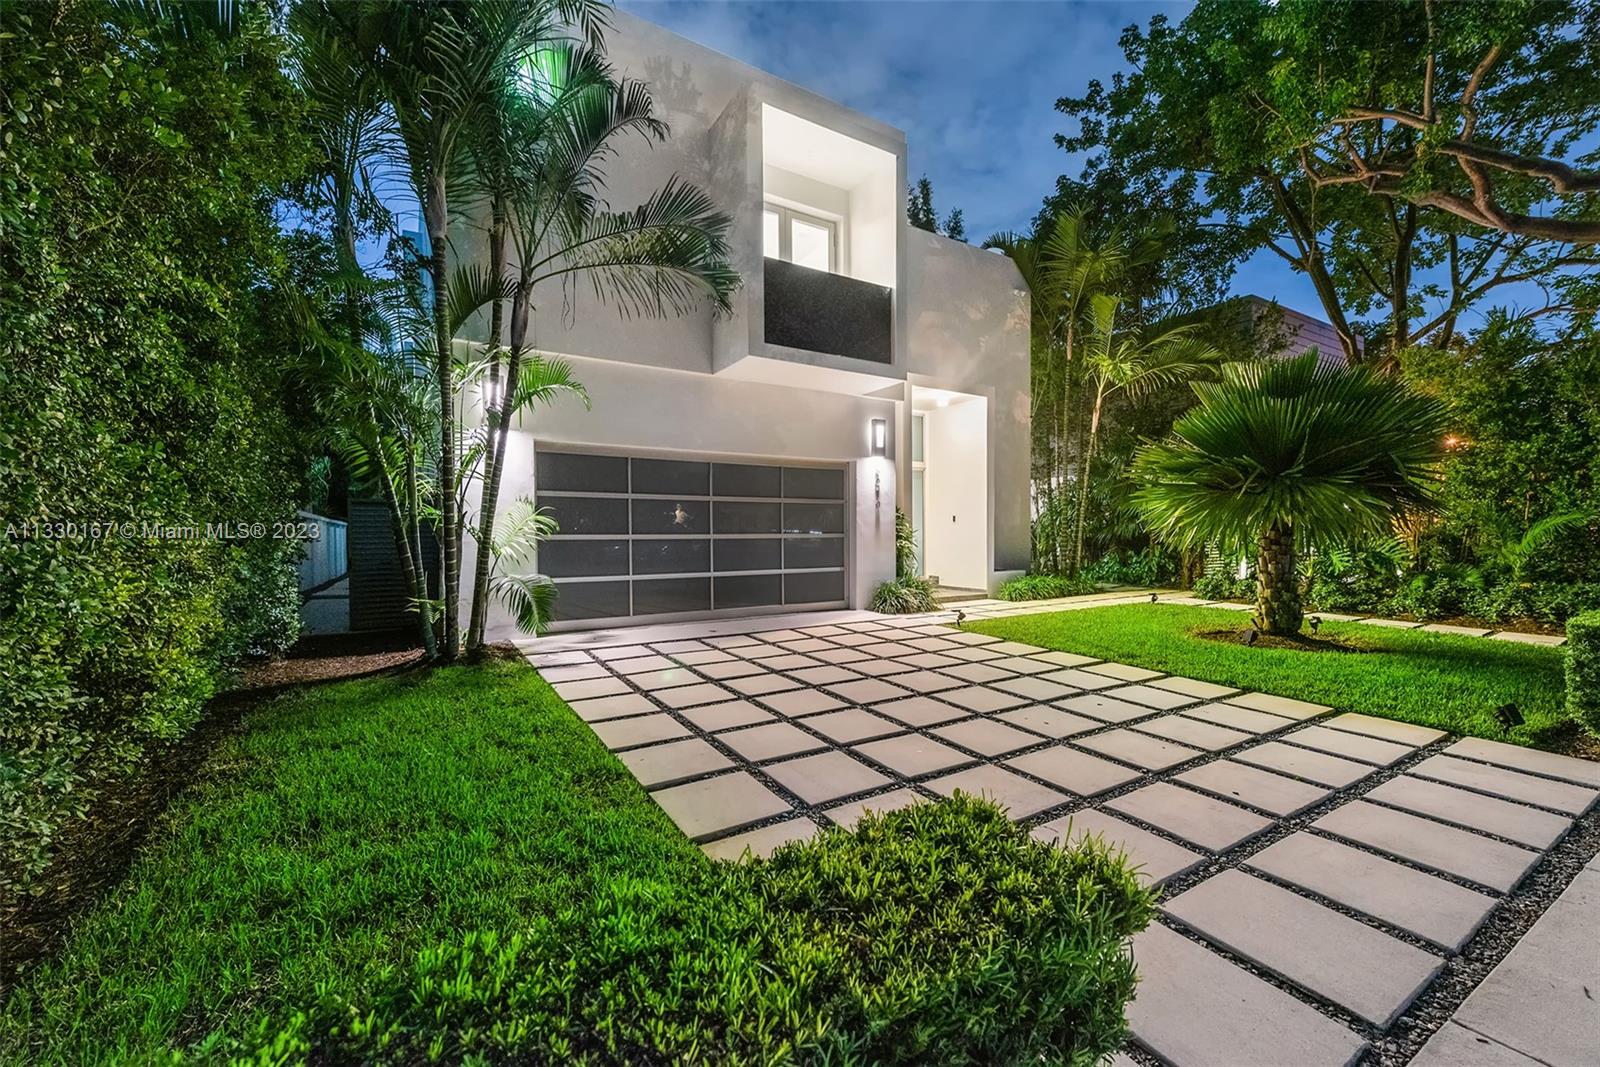 Miami charm meets modern lux - this five bedroom, 3 bathroom pool home is a rare gem! Nestled in the pedestrian friendly community of South Miami and neighboring the Coral Gables waterways that lead you right into the heart of Coconut Grove and Downtown. Step inside the foyer and you are instantly captivated by 20 foot ceilings graced by walls of windows in this one of a kind great room that gives open concept a new meaning. The canopy of bamboo provides the privacy you deserve and creates a unique backdrop as you look out of the oversized windows. Once you step on to the covered patio, an oasis awaits along with all the choices that make outdoor living in South Florida a fan favorite. Featuring a summer kitchen, outdoor dining, multiple poolside lounge areas and unique pool waterfall!